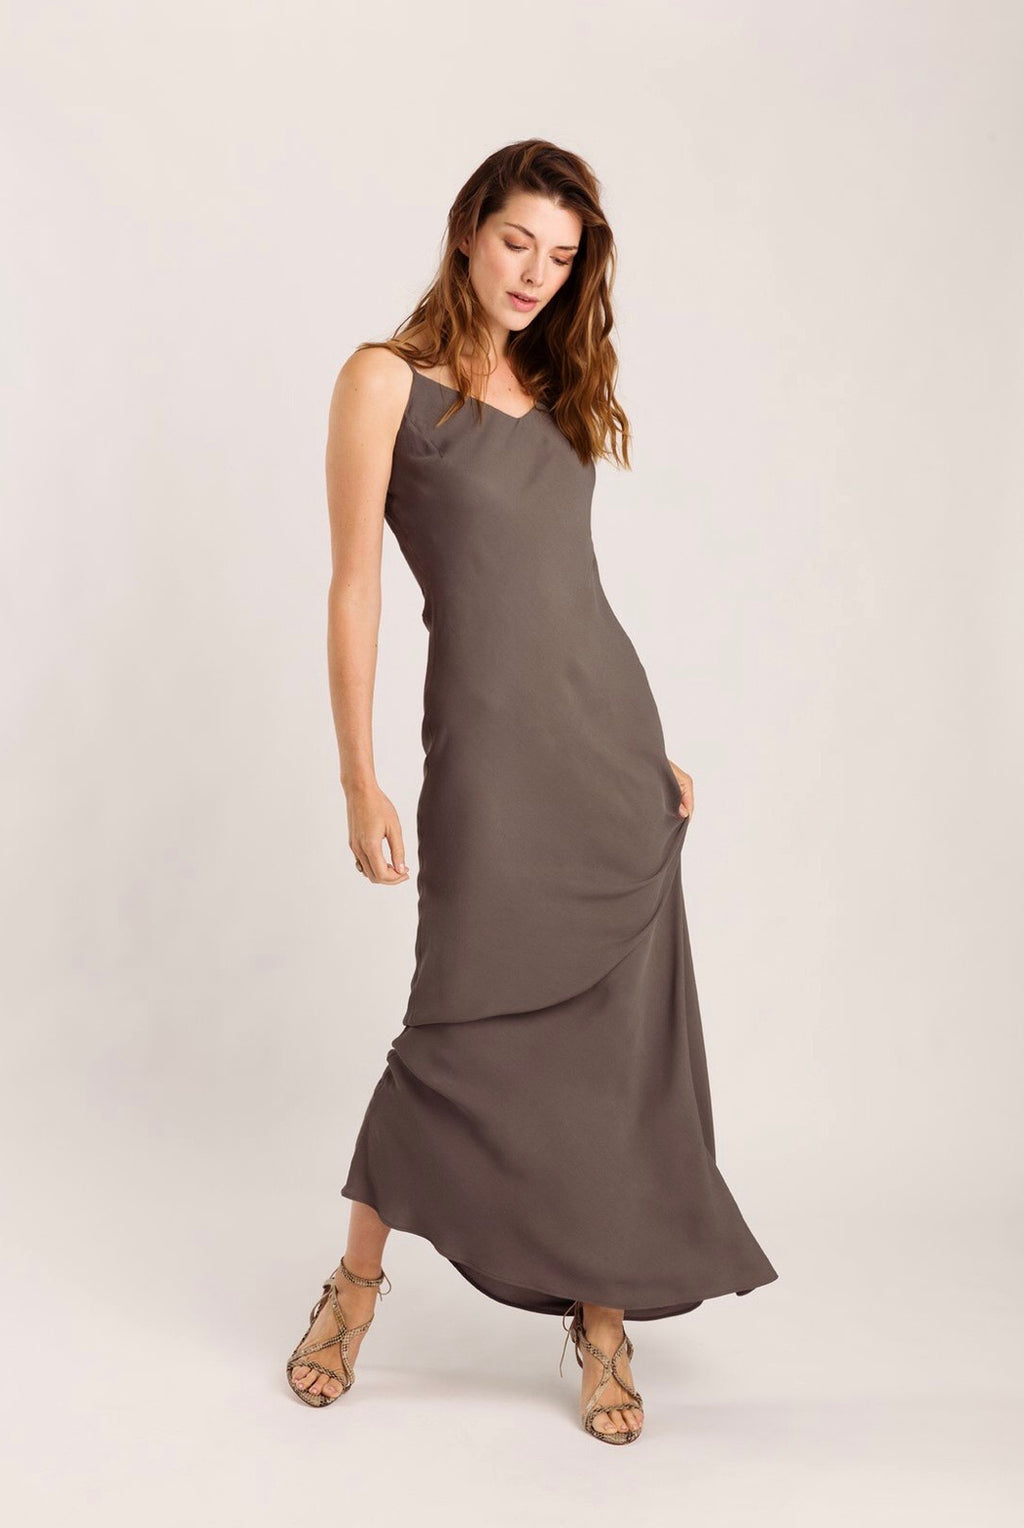 Wearable Stories Elise Dress anthracite